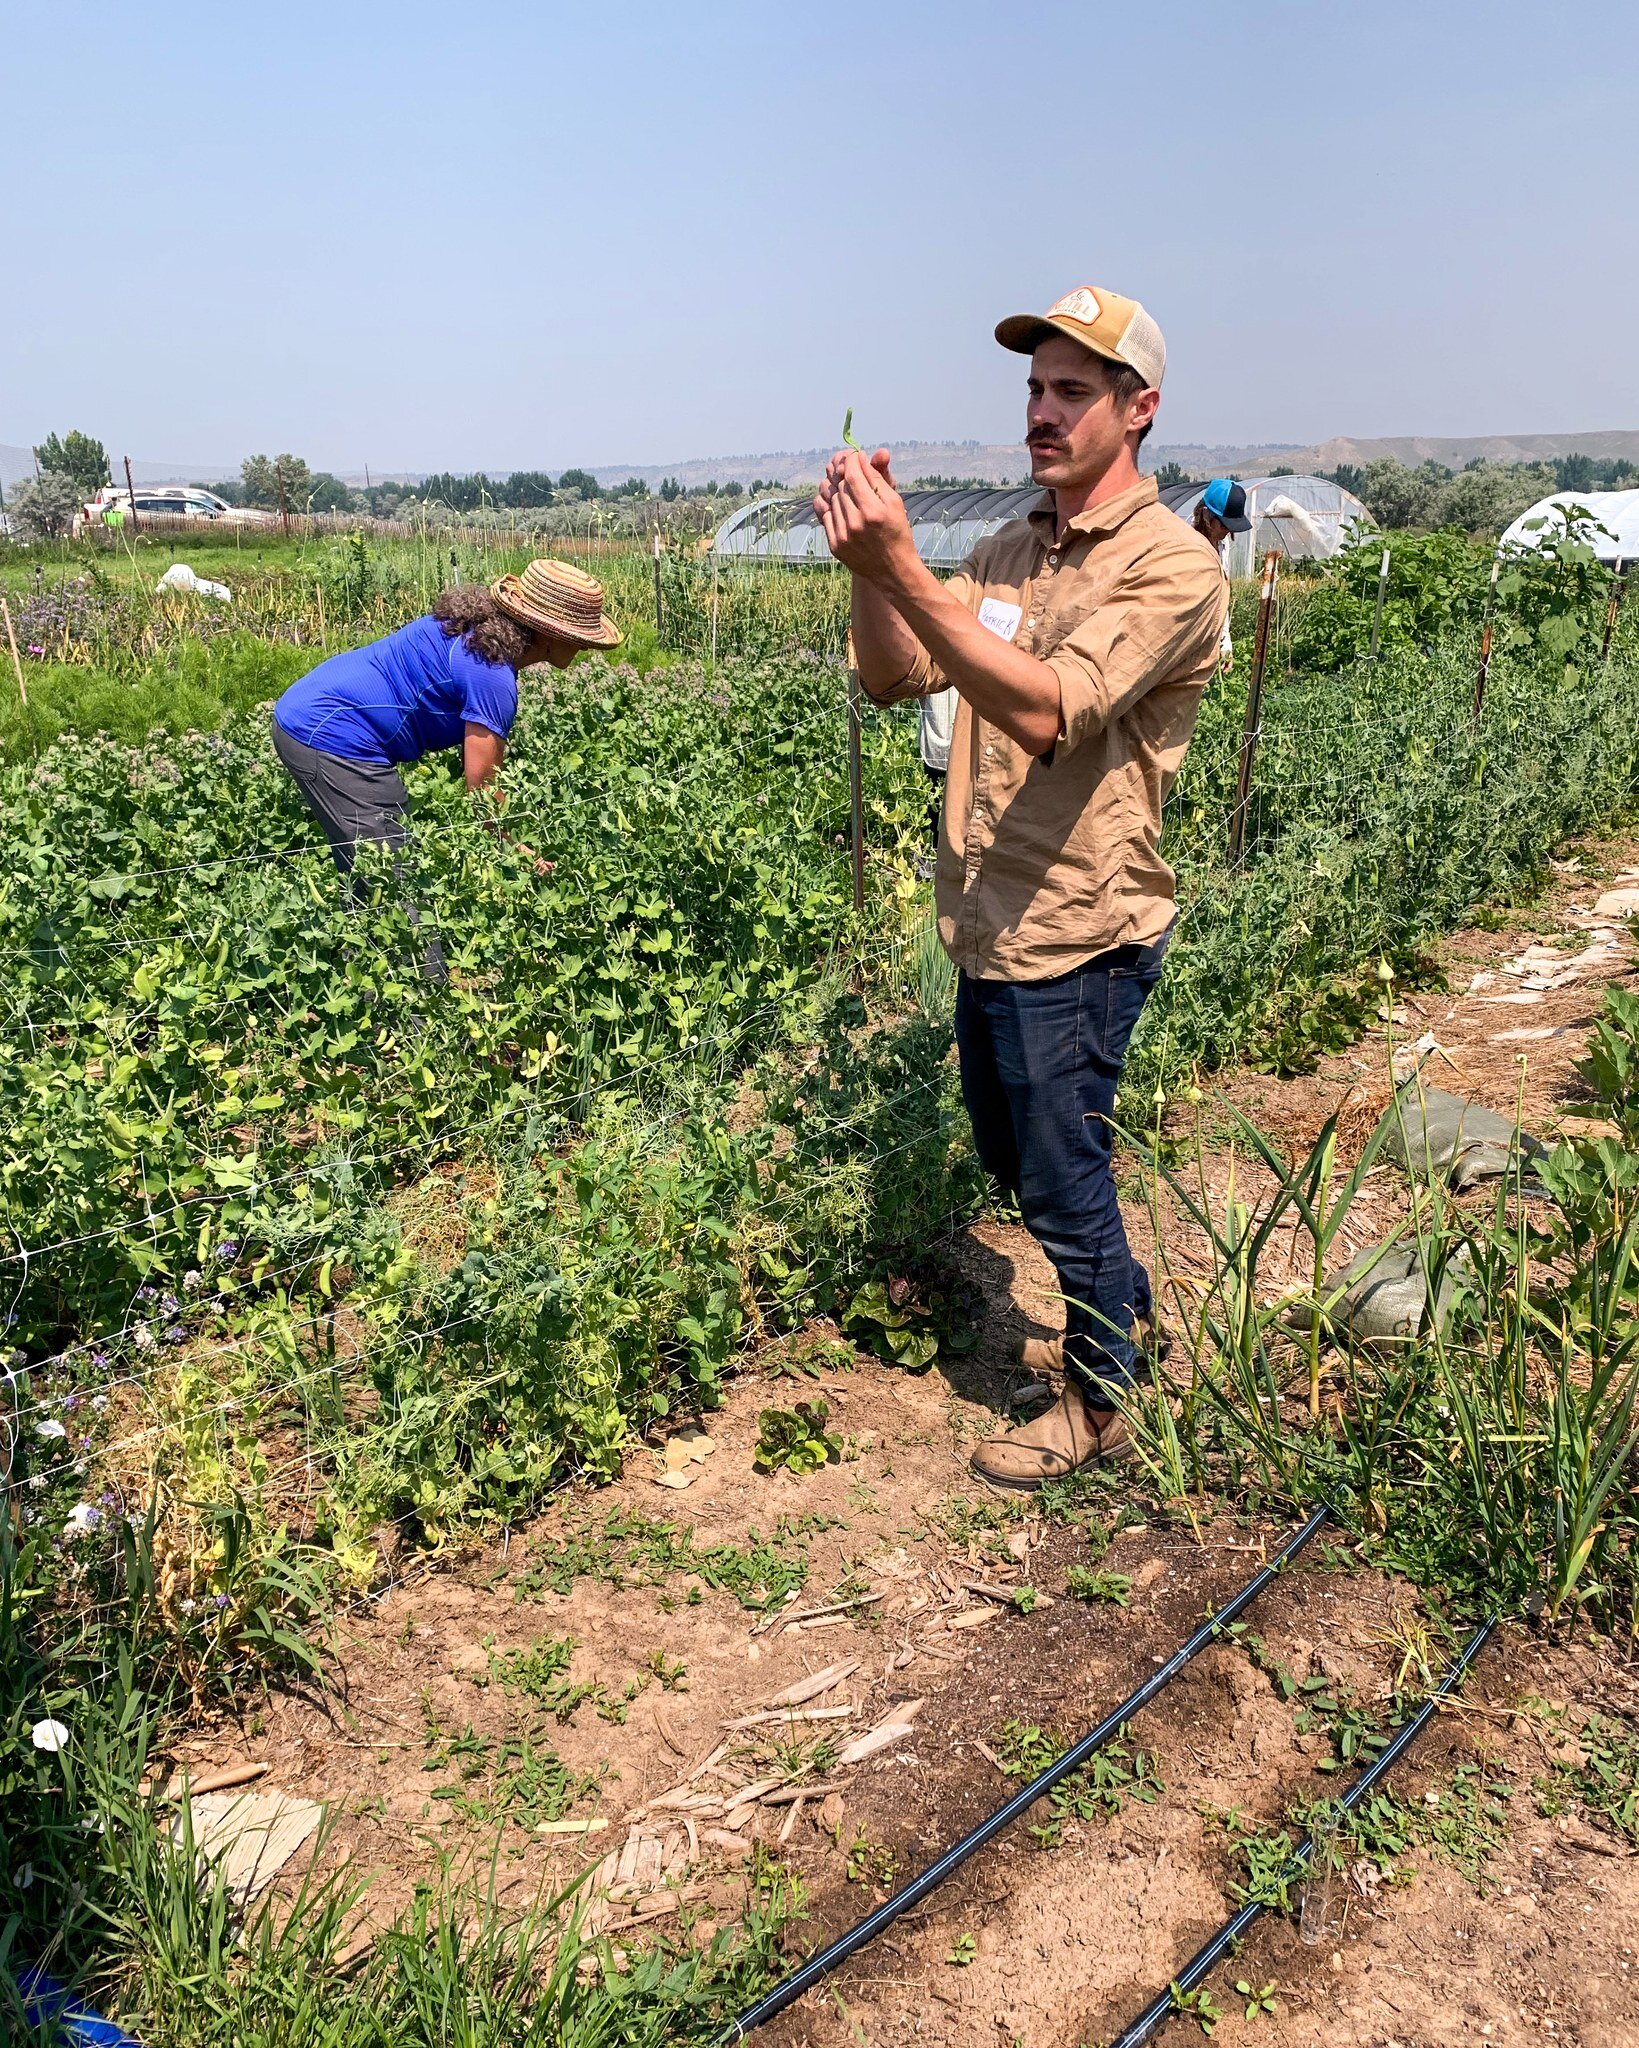 It was a pleasure to attend a Tour and Soil Health Practices Presentation hosted by Stone Soup Garden and Northern Plains Resource Council. 

Patrick Certain and Claire Overholt led a tour of their small-scale, regenerative farming operation, where t